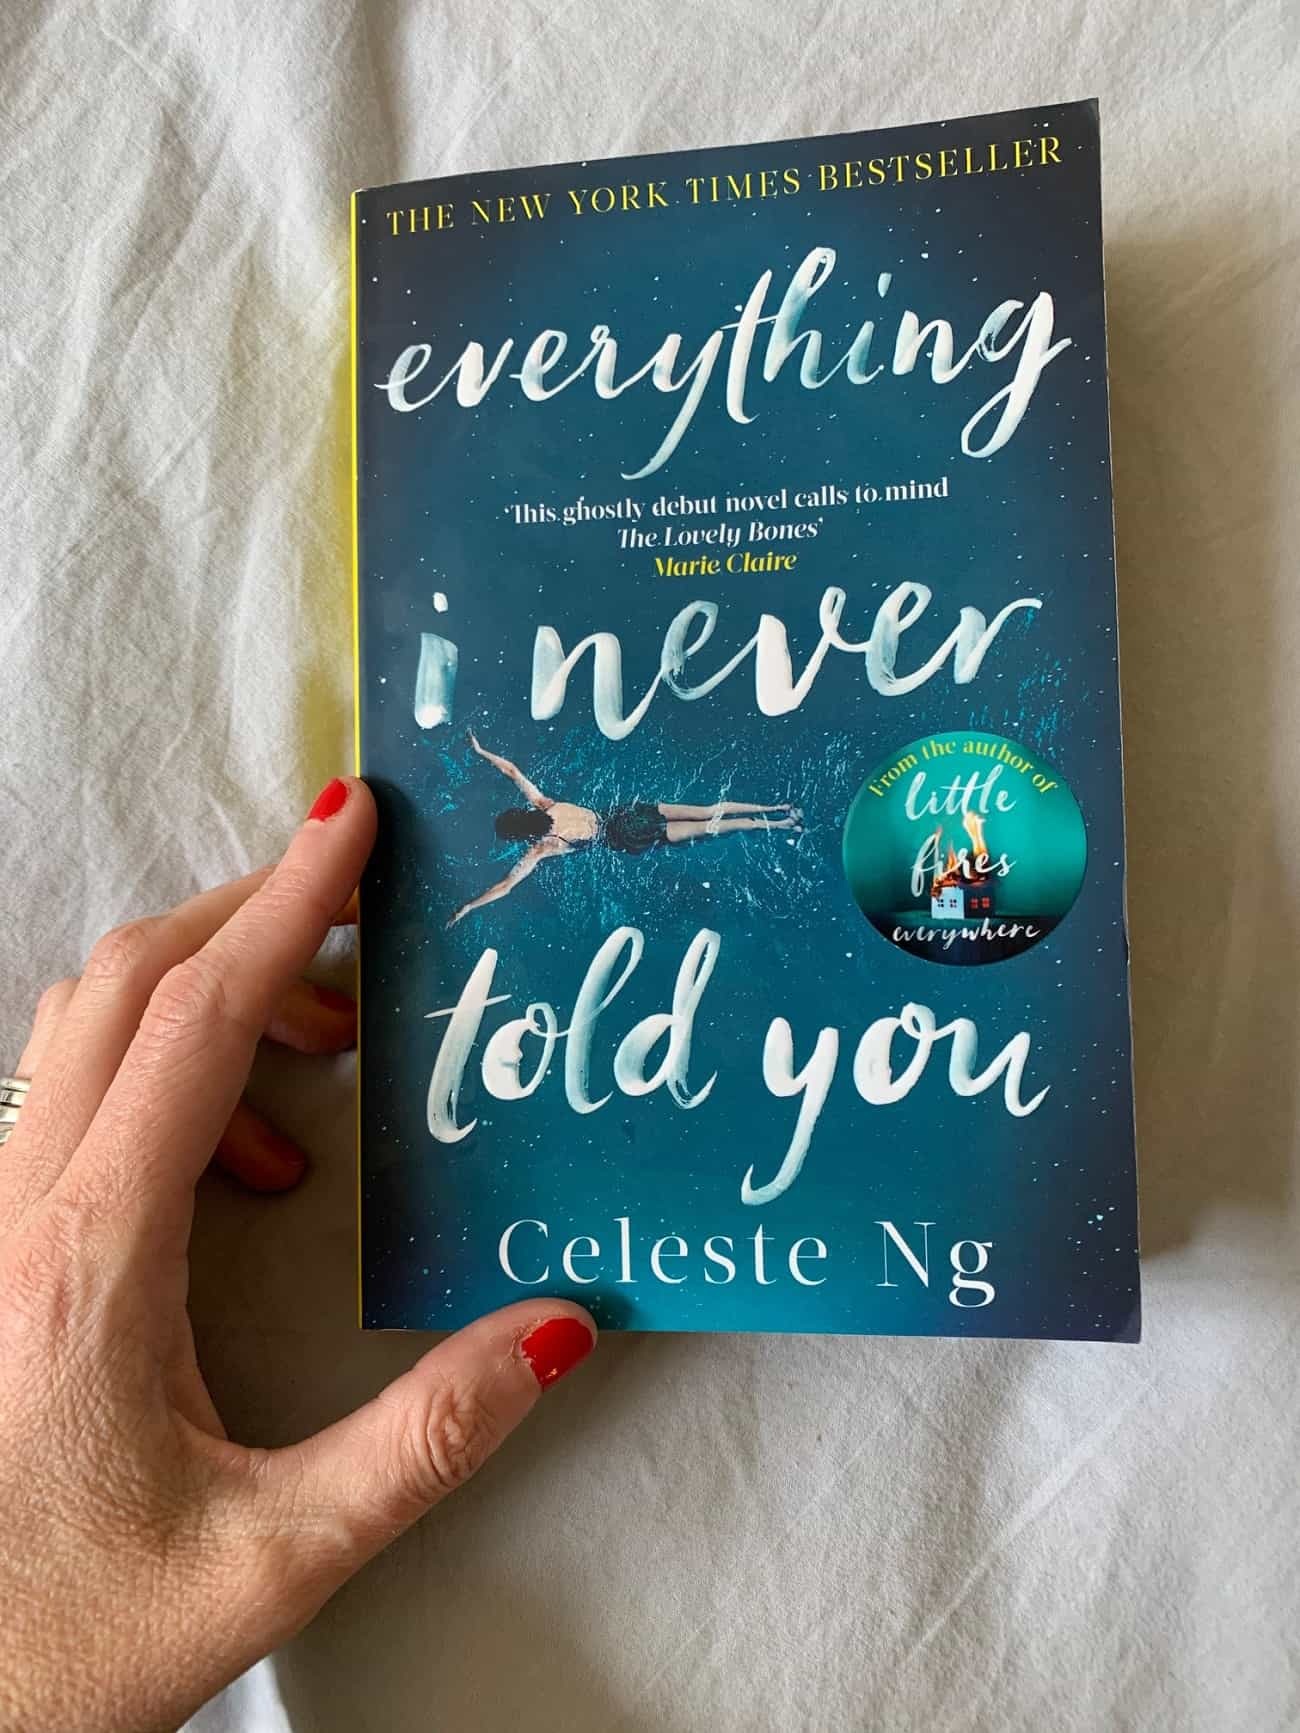 Everything I never told you by Celeste Ng